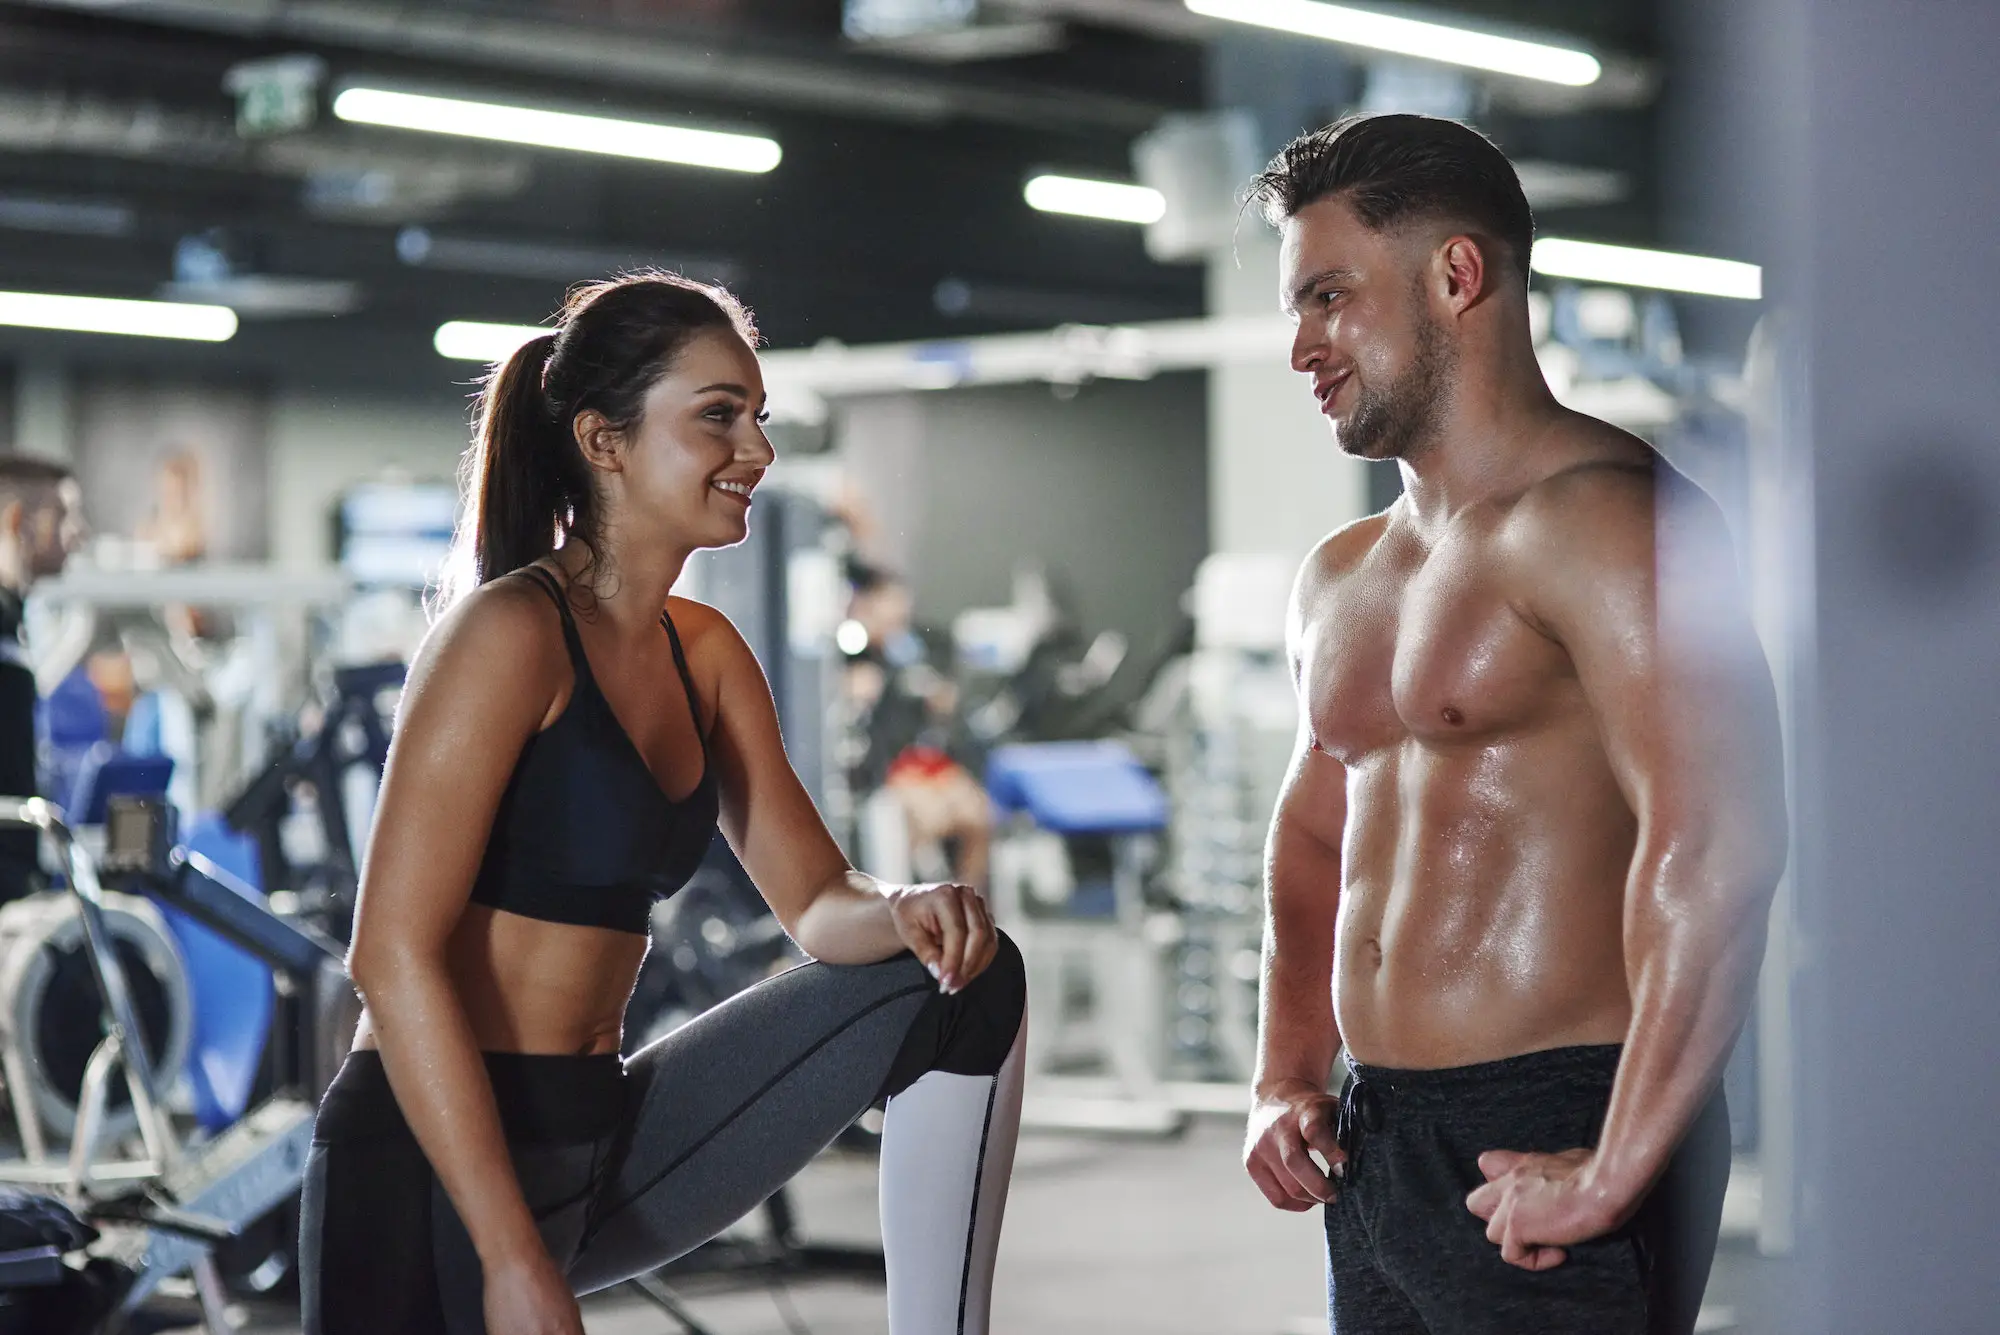 Smiling man and woman talking at the gym